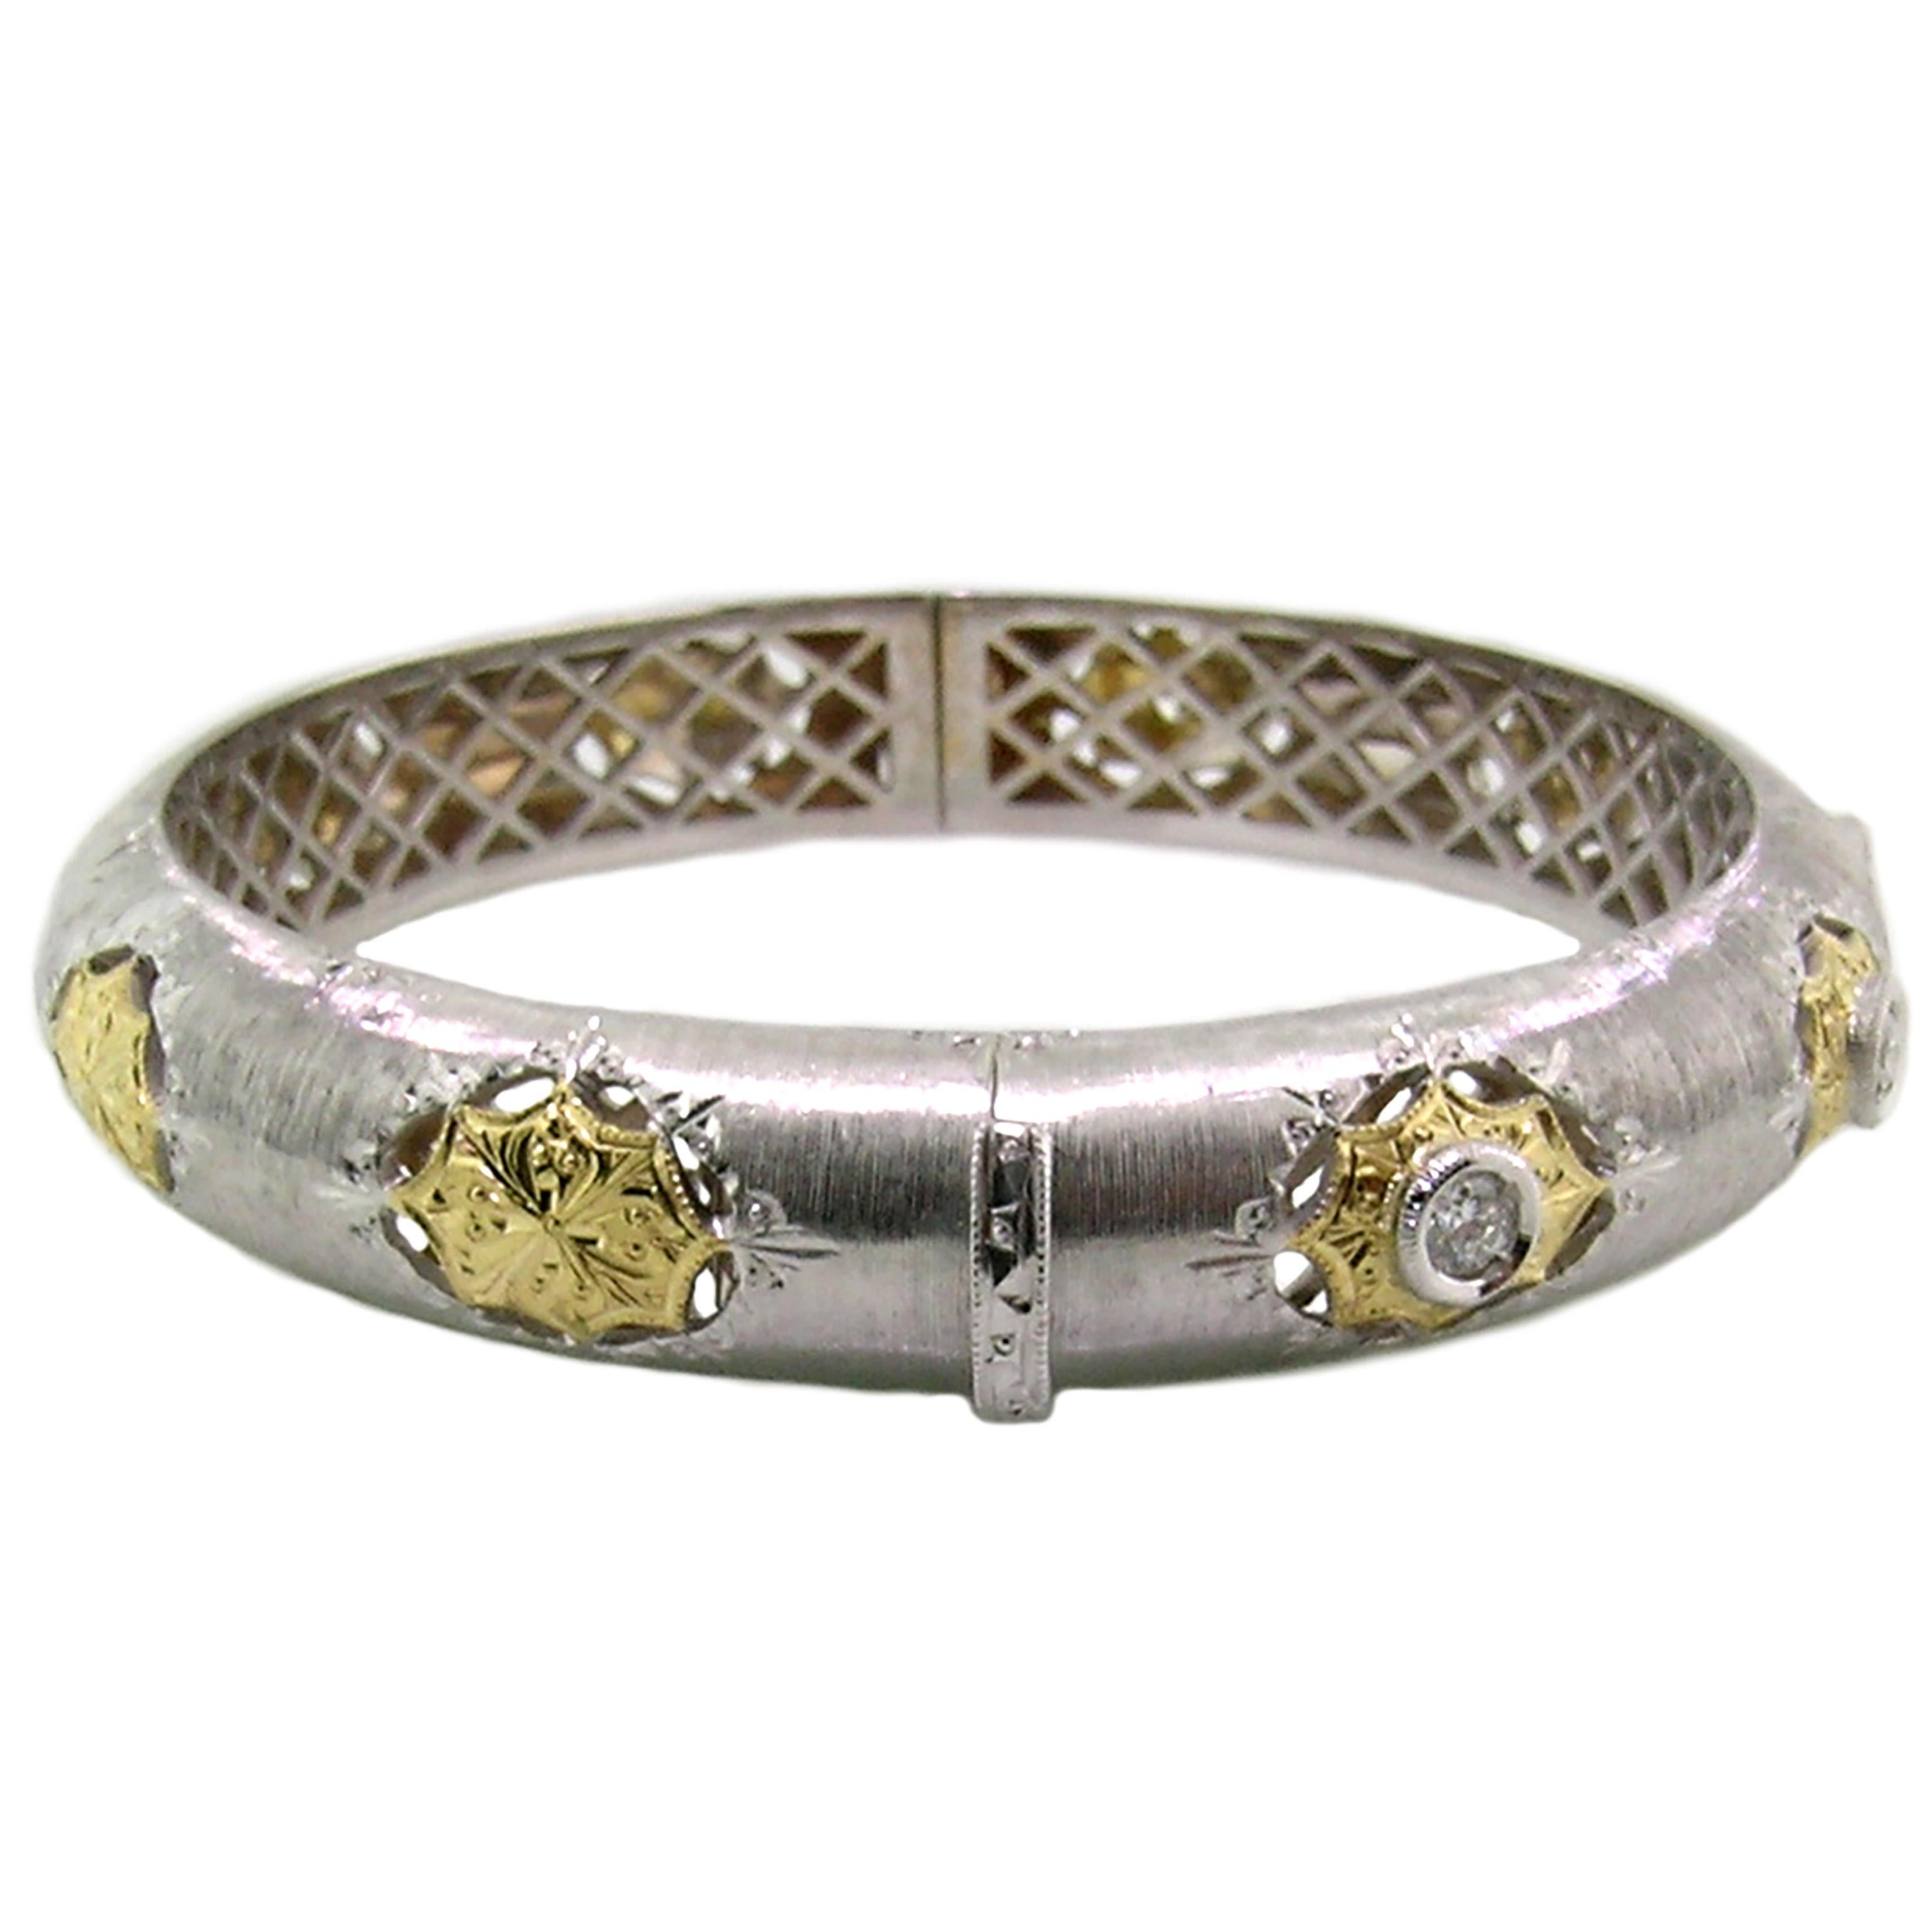 Round Cut 18kt Gold and Diamond Florentine Engraved Bangle, Handmade in Italy